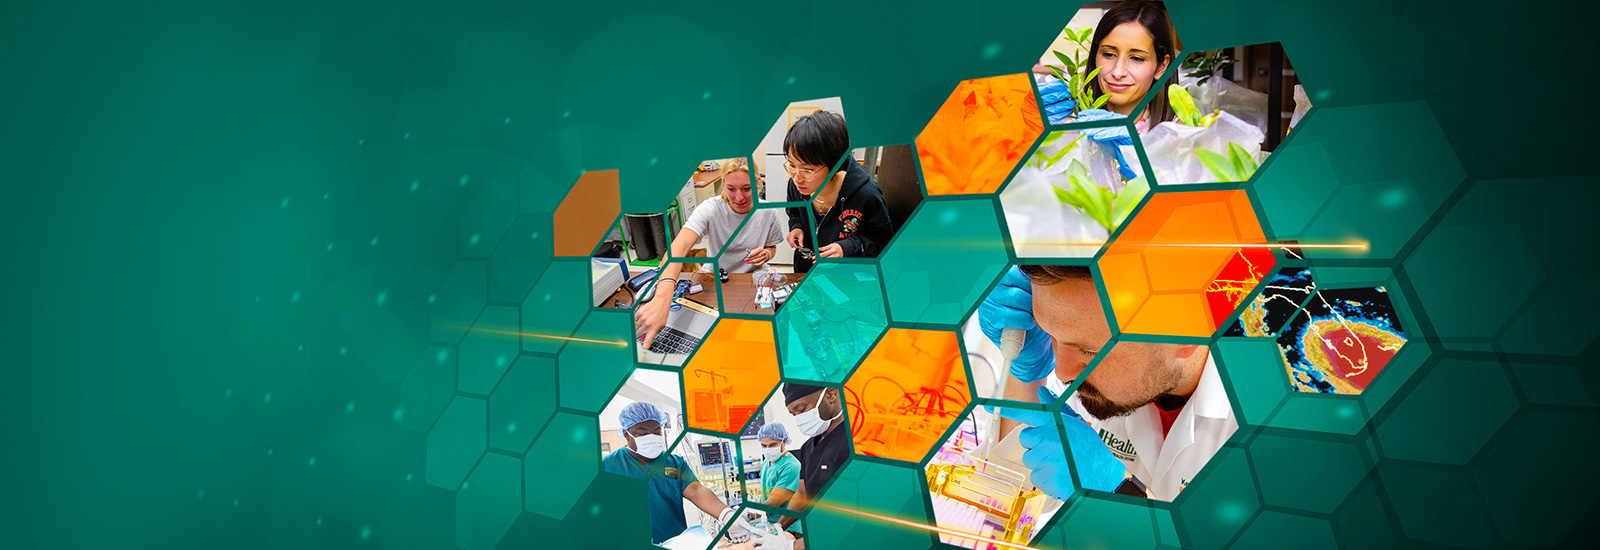 Recognized for its groundbreaking research and graduate education, the University of Miami is one of six leading research universities invited to join the association.